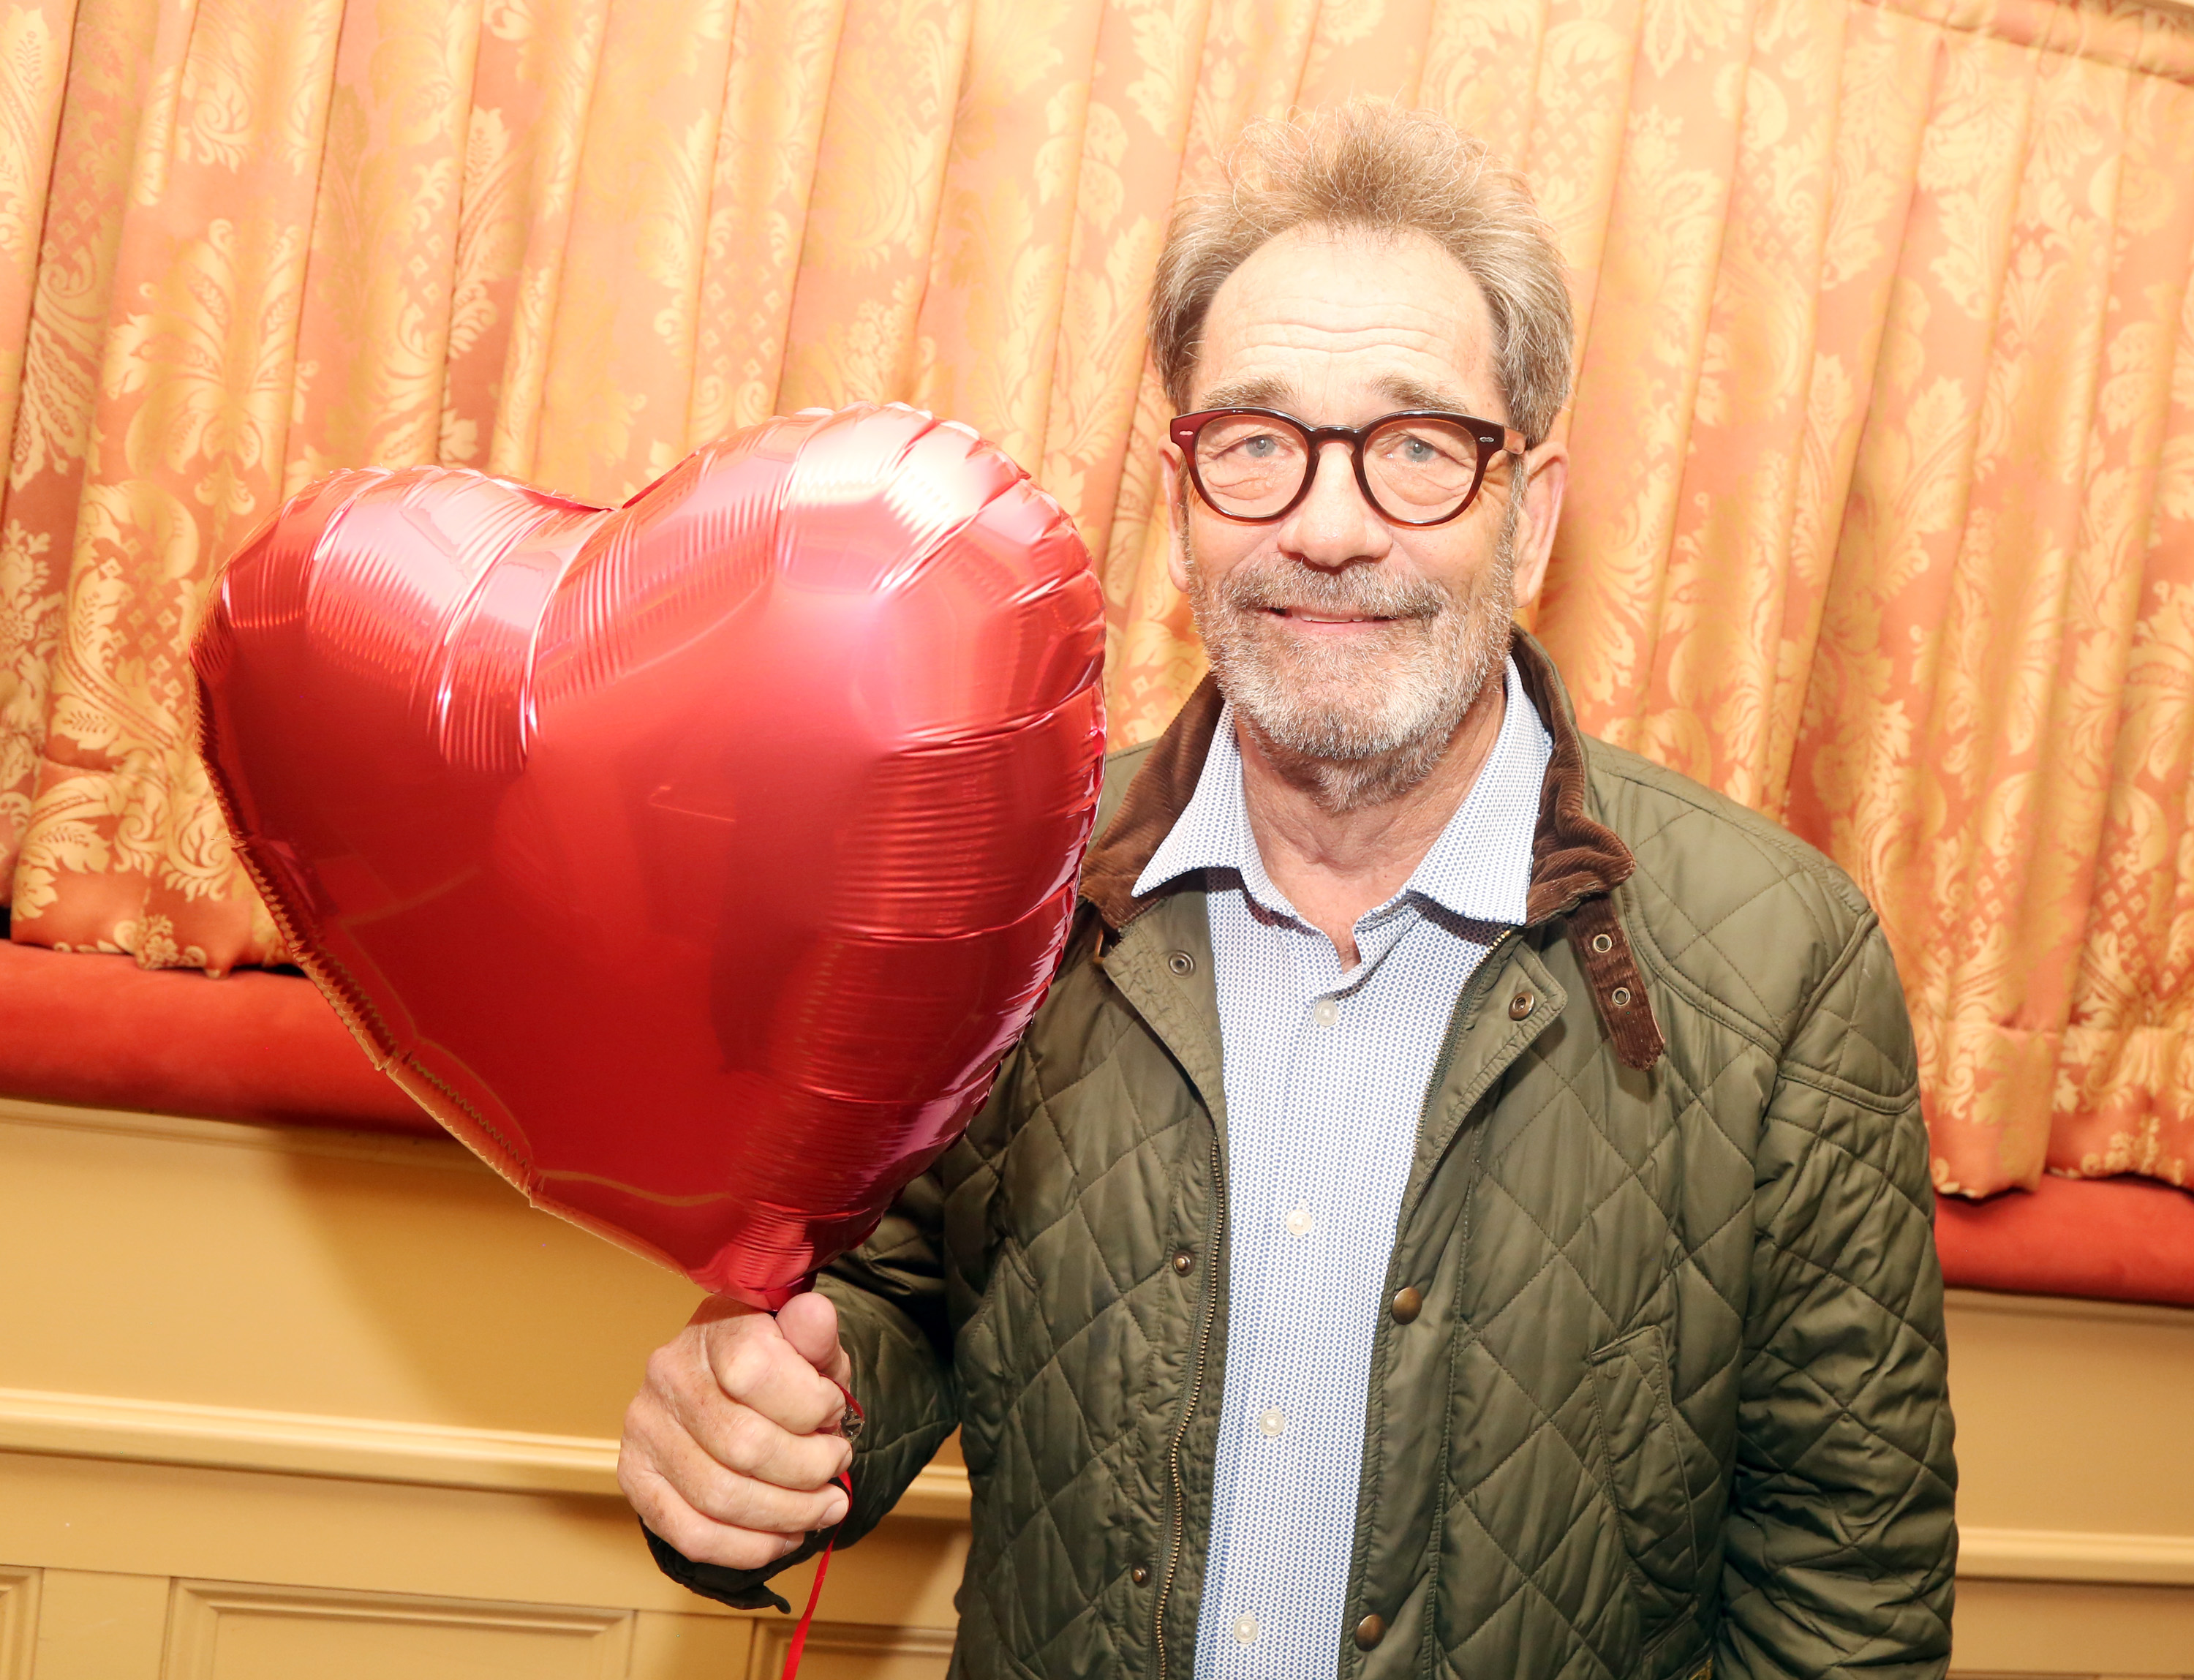 Huey Lewis at the box office opening for the new musical featuring his music "The Heart of Rock & Roll" on Broadway on February 14, 2024, in New York City. | Source: Getty Images